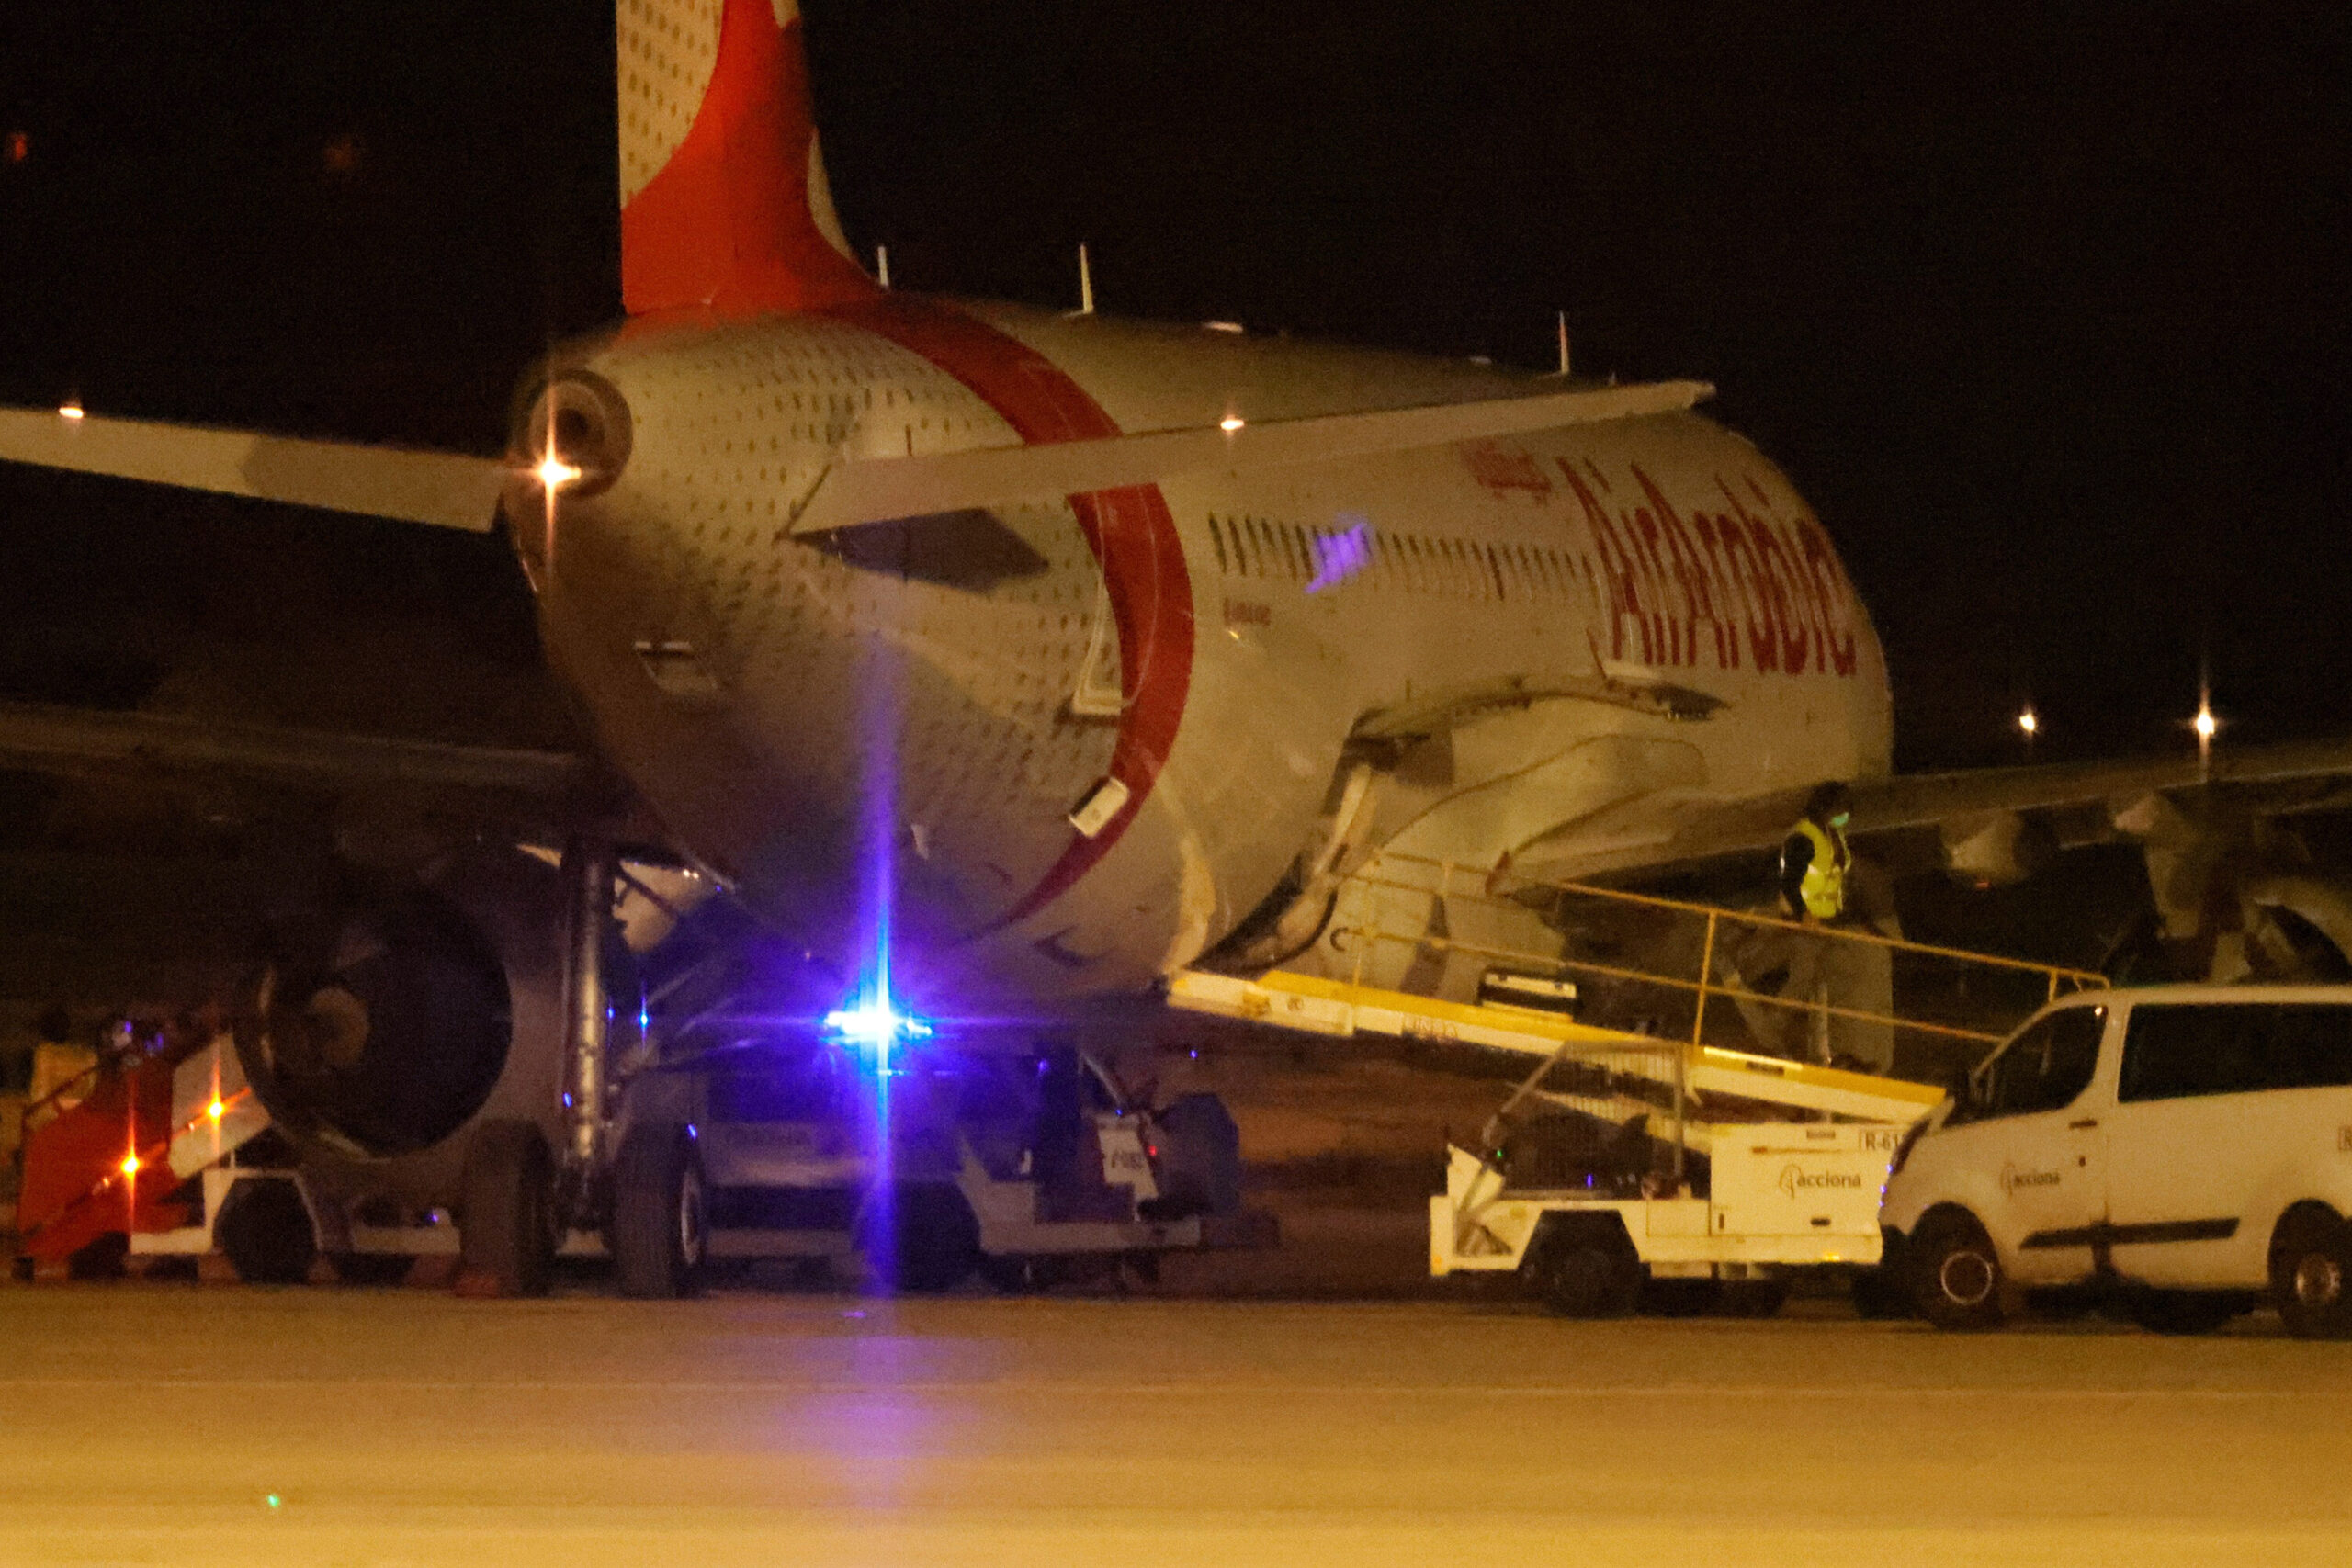 Cati Clader/EPA-EFE/ShutterstockThe AirArabia plane is pictured after making an emergency landing at Palma de Mallorca